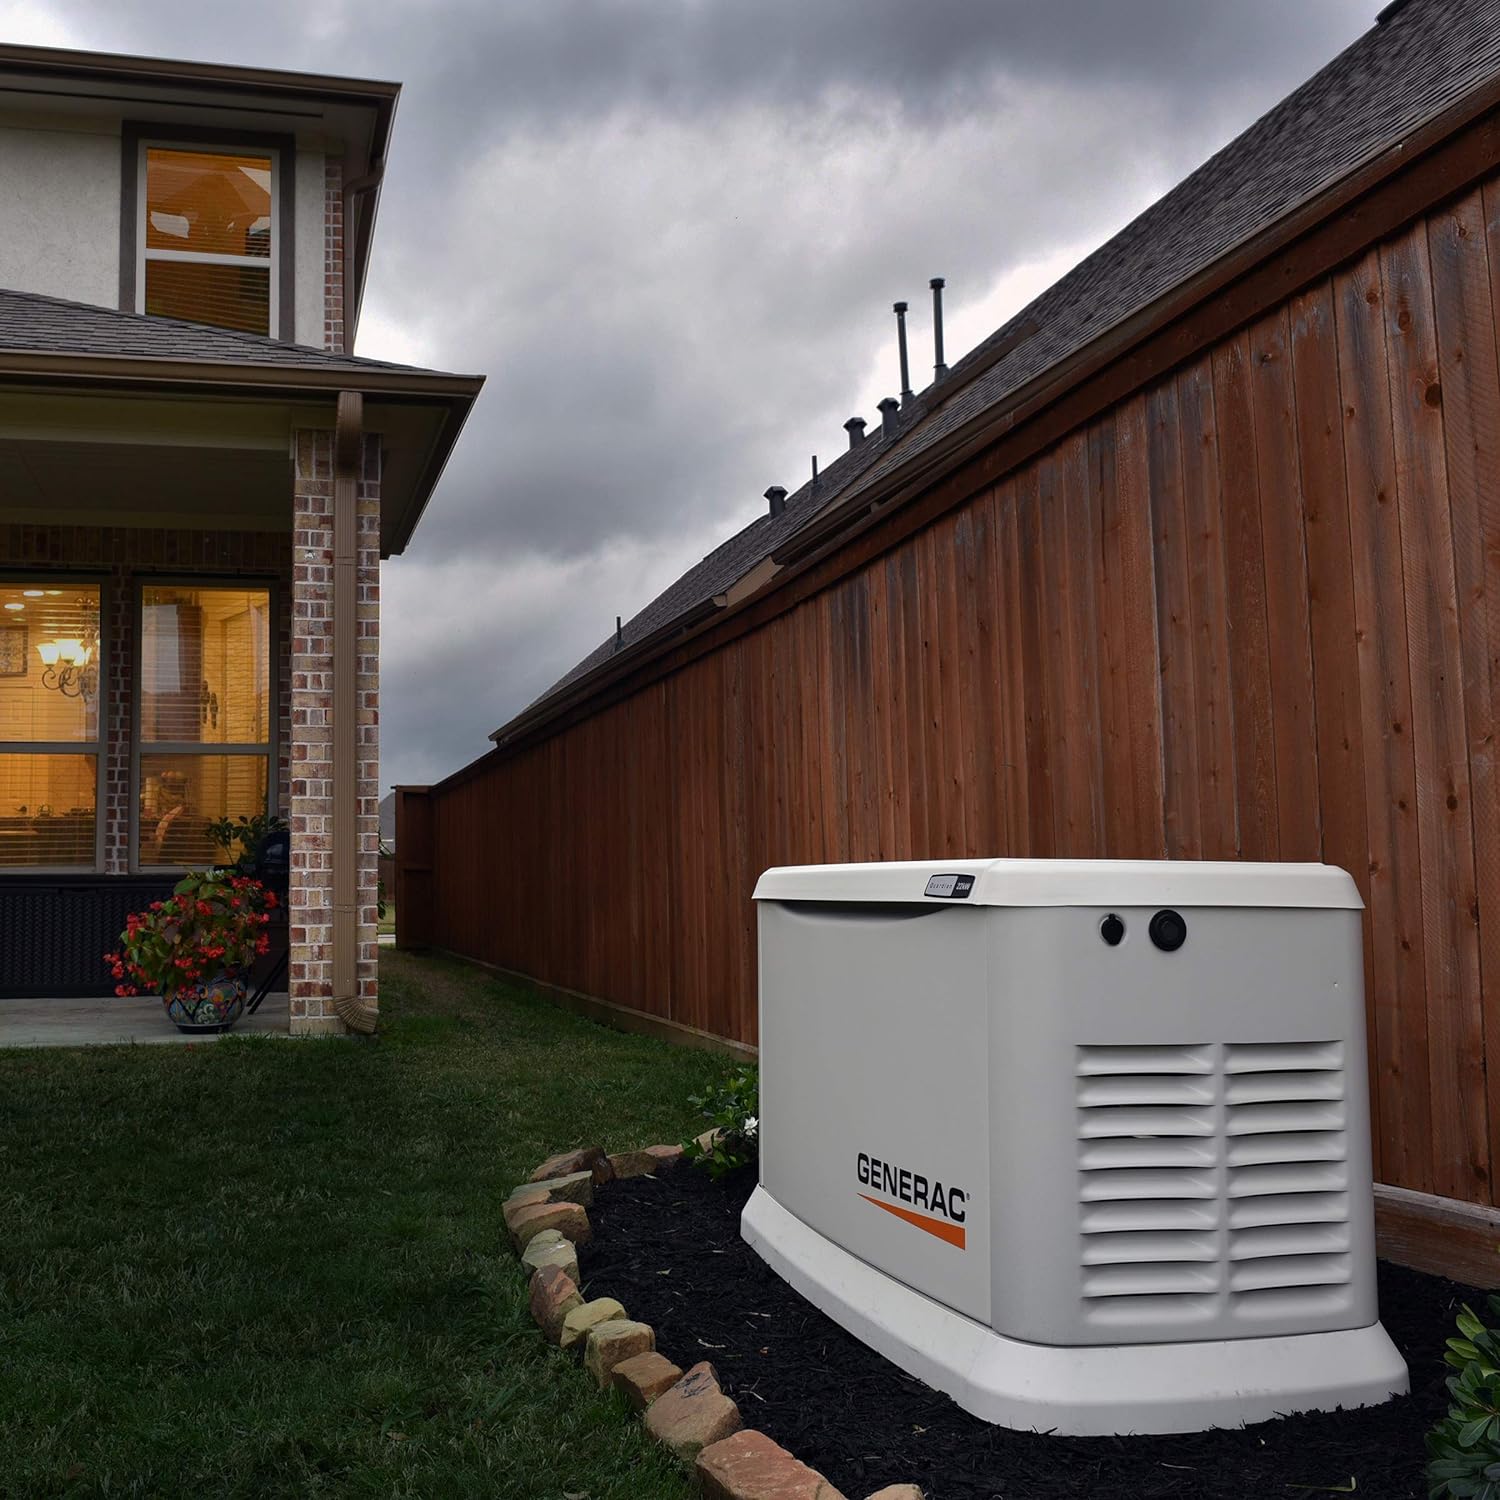 Generac 7290 26kW Air Cooled Guardian Series Home Standby Generator - Comprehensive Protection - Smart Controls - Versatile Power - Wi-Fi Connectivity - Real-Time Updates - Generac 7290 26kW Air Cooled Generator Review